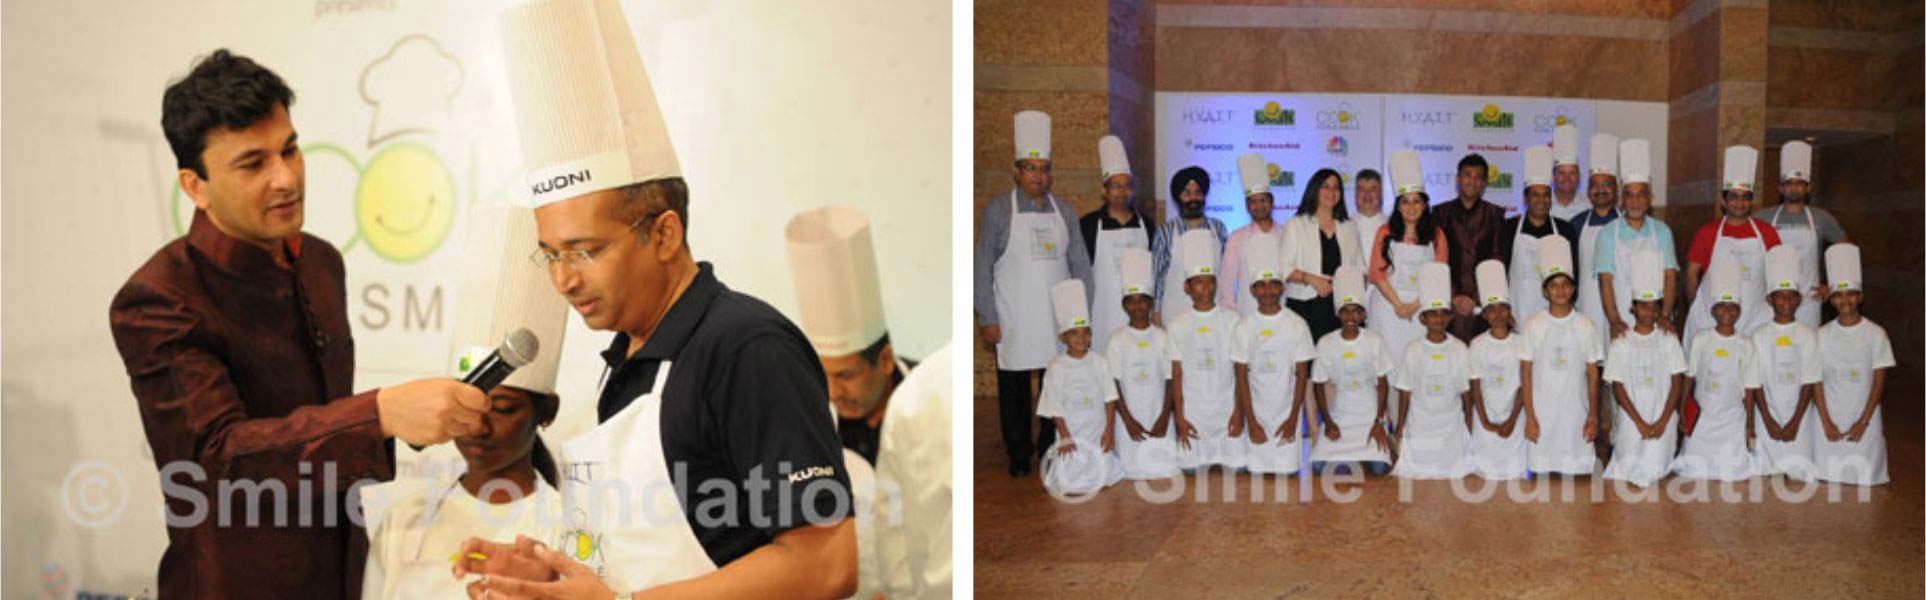 Top corporate leaders ‘Cook for a Smile’ with Chef Vikas Khnanna